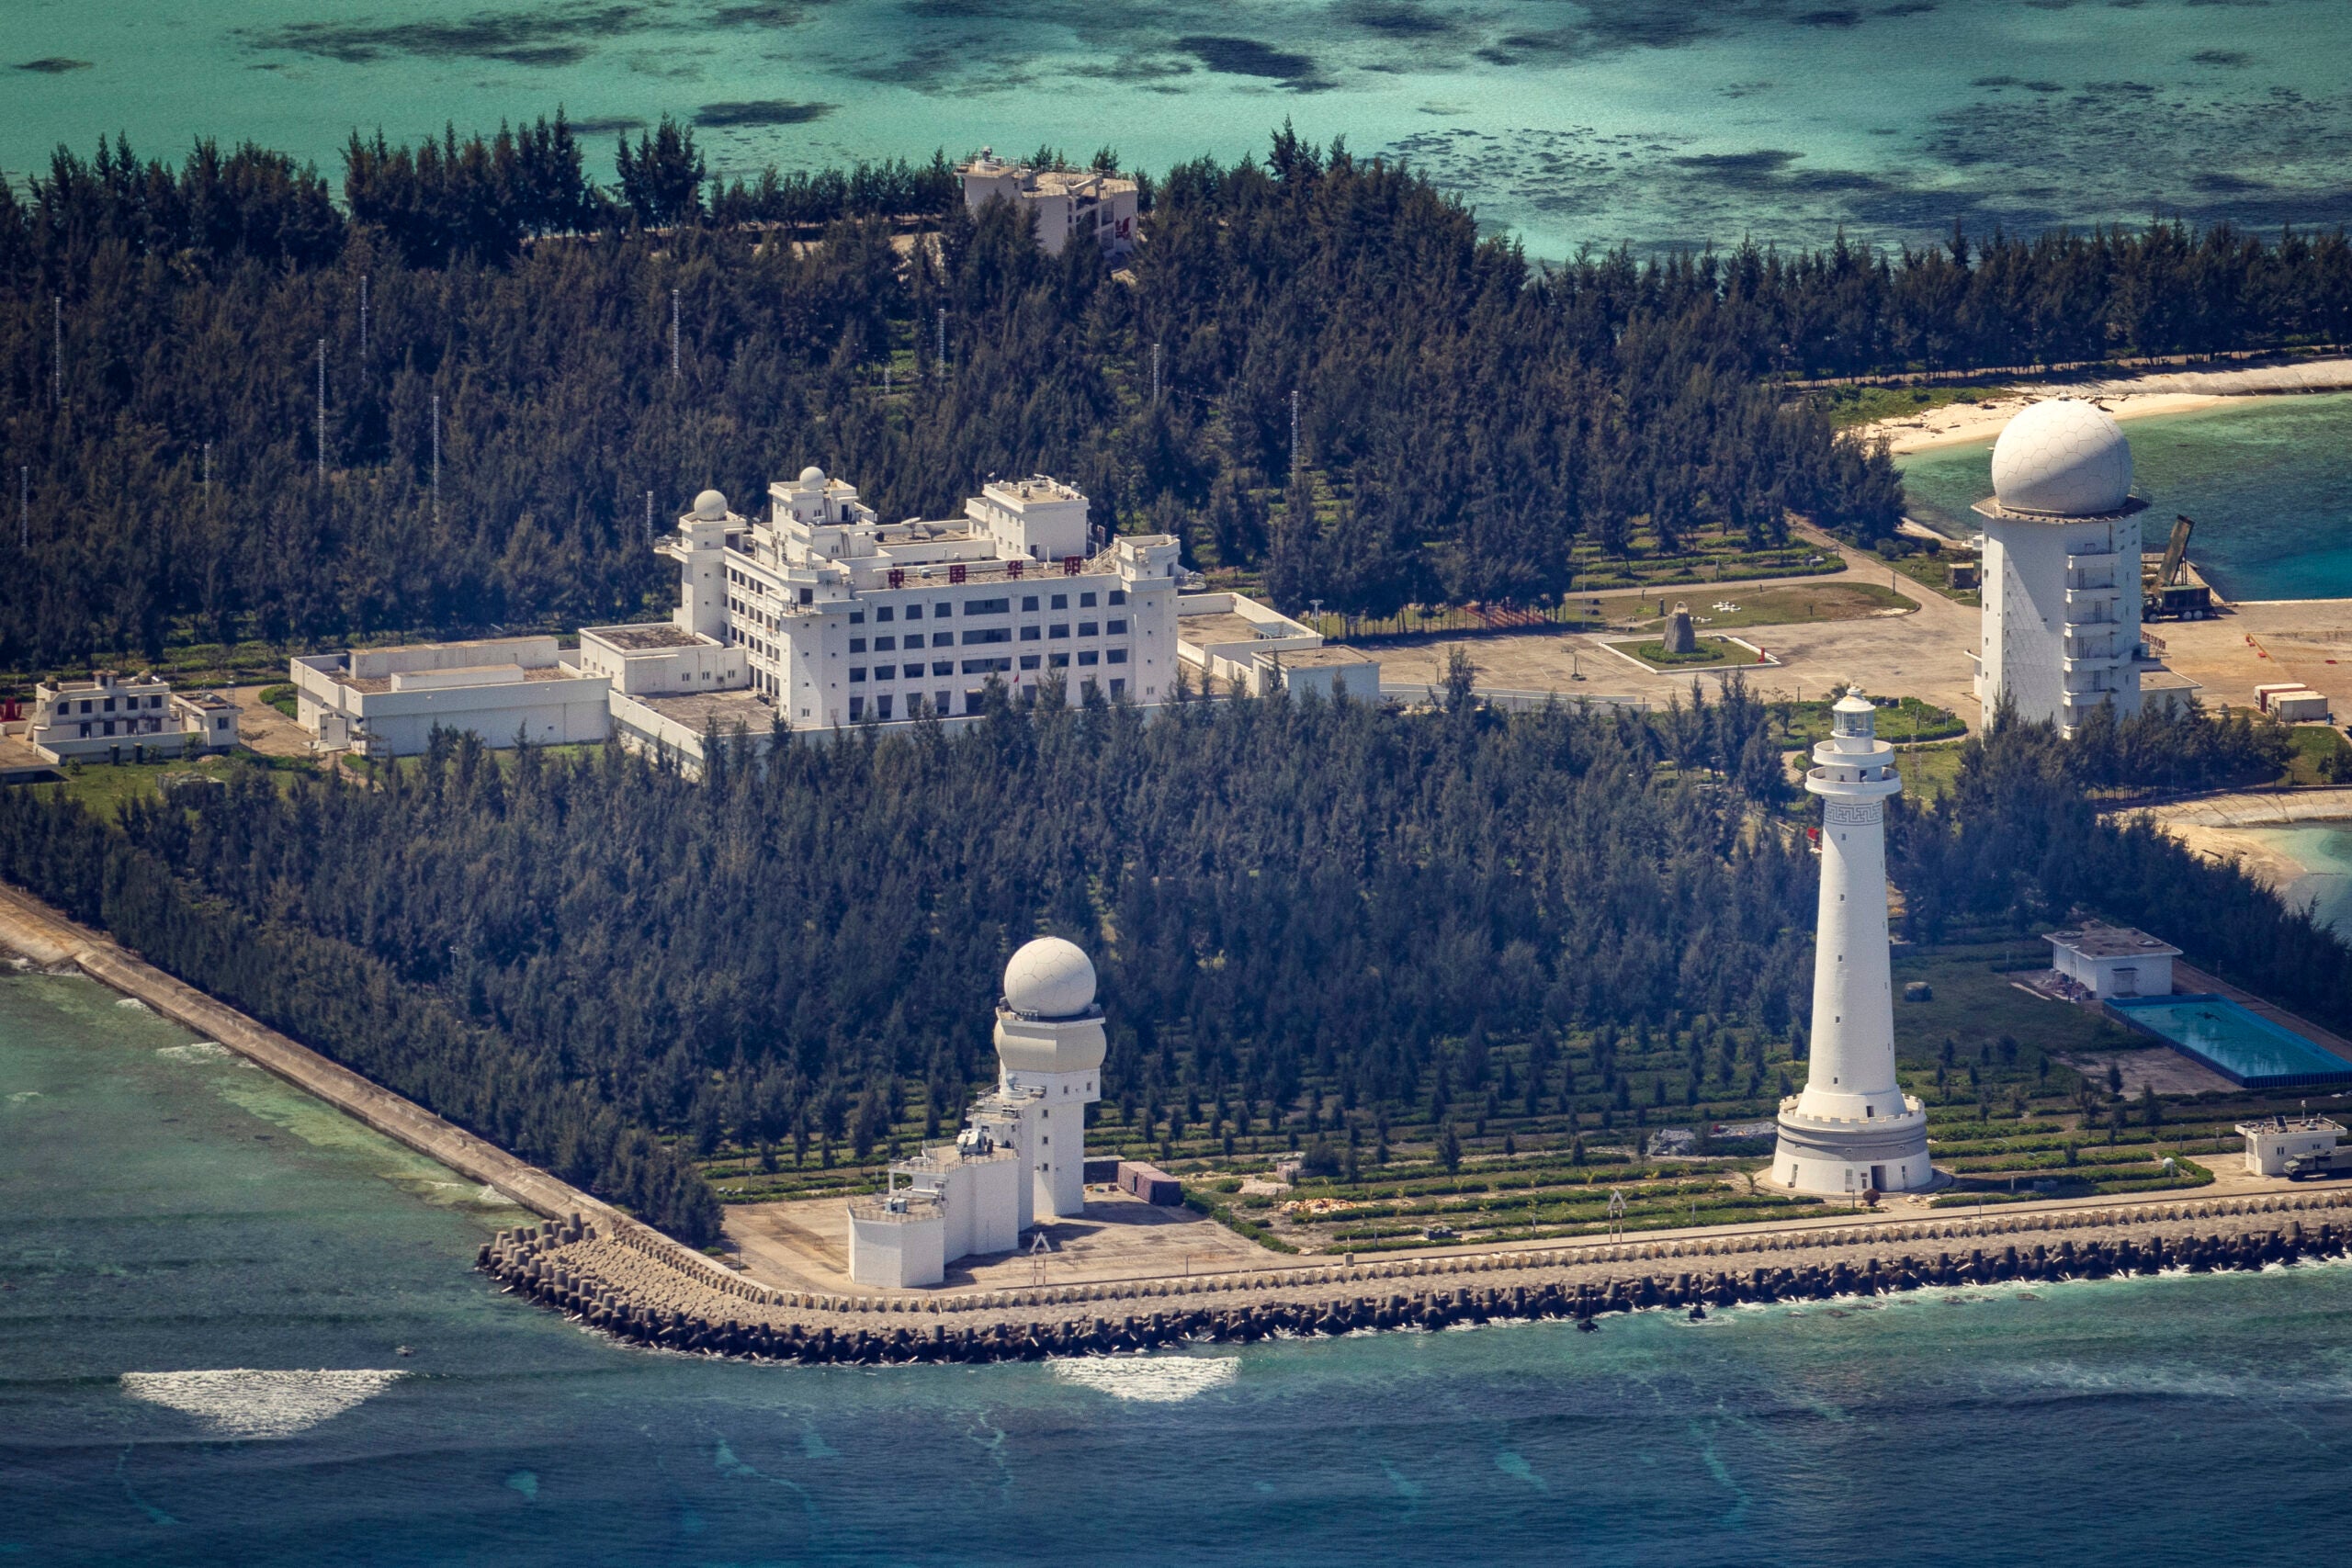 SPRATLY ISLANDS, AT SEA - OCTOBER 25: Buildings and structures are seen on the artificial island built by China in Cuarteron Reef on October 25, 2022 in Spratly Islands, South China Sea. China has progressively asserted its claim of ownership over disputed islands in the South China Sea by artificially increasing the size of islands, creating new islands and building ports, military outposts and airstrips. The South China sea is an important trade route and is of significant interest as geopolitical tensions remain high in the region. (Photo by Ezra Acayan/Getty Images)